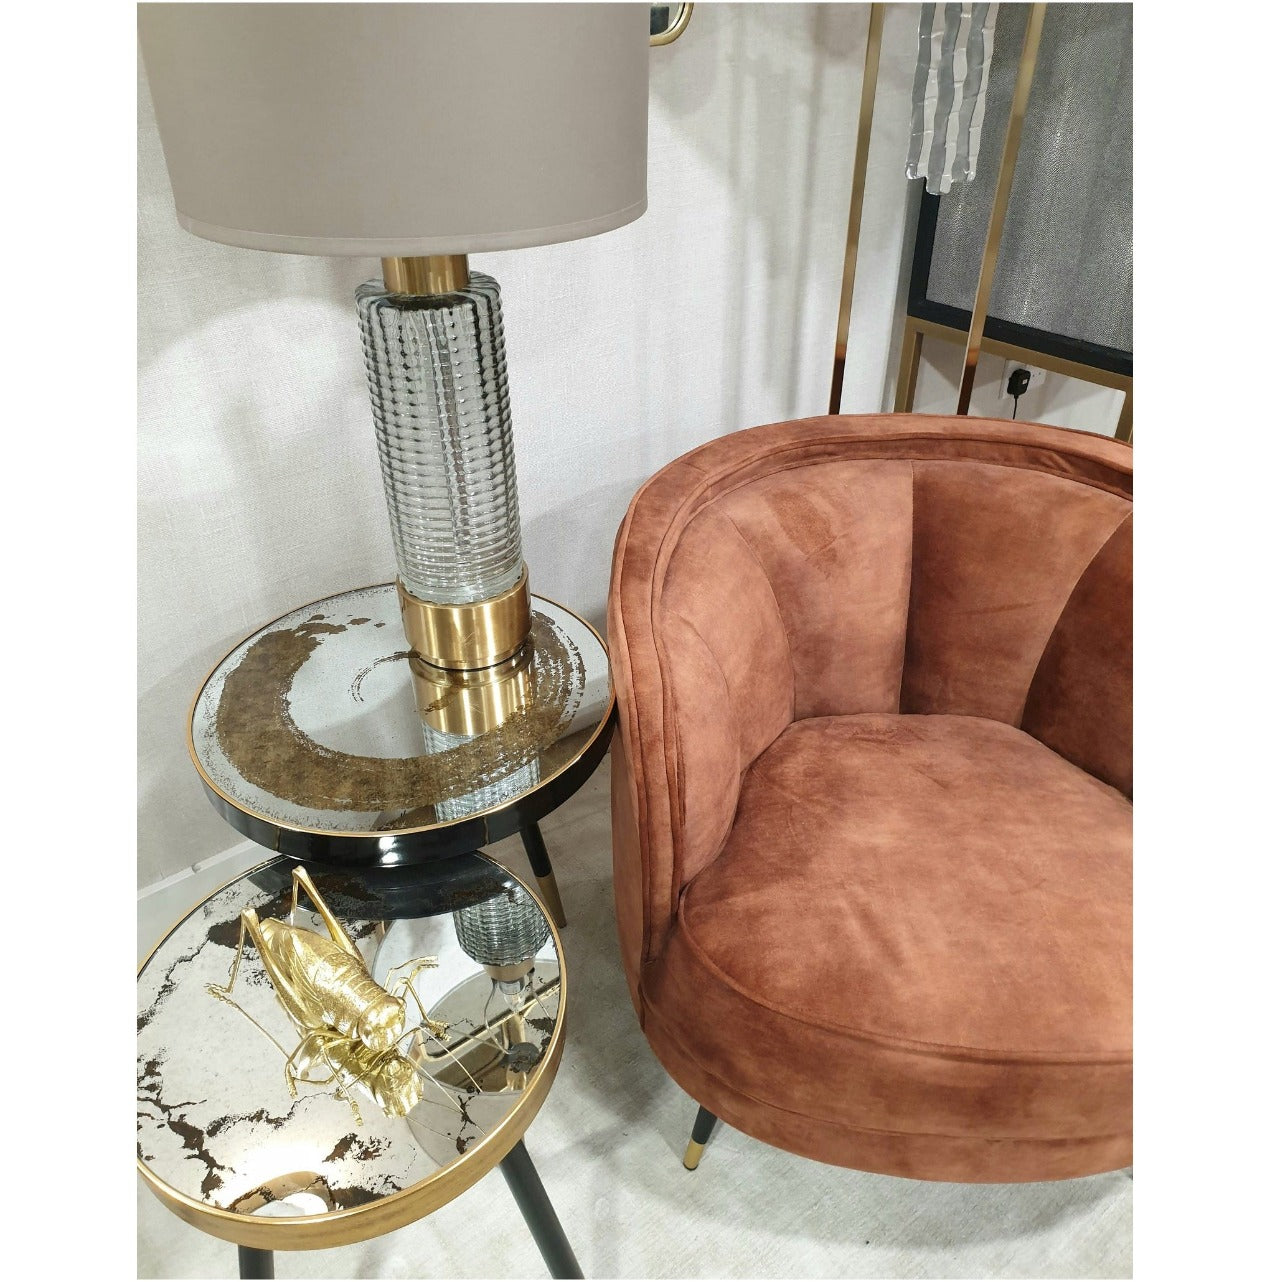 Mindy Brownes Vega Side Table  Black painted leg with gold tip and surround, 37cm diameter side table, mirrored top with distressed grey swirl patterned top. Can be styled solo or as part of a collaboration with the Palm, Bellatrix & Venus side tables for the ultimate styling effect.